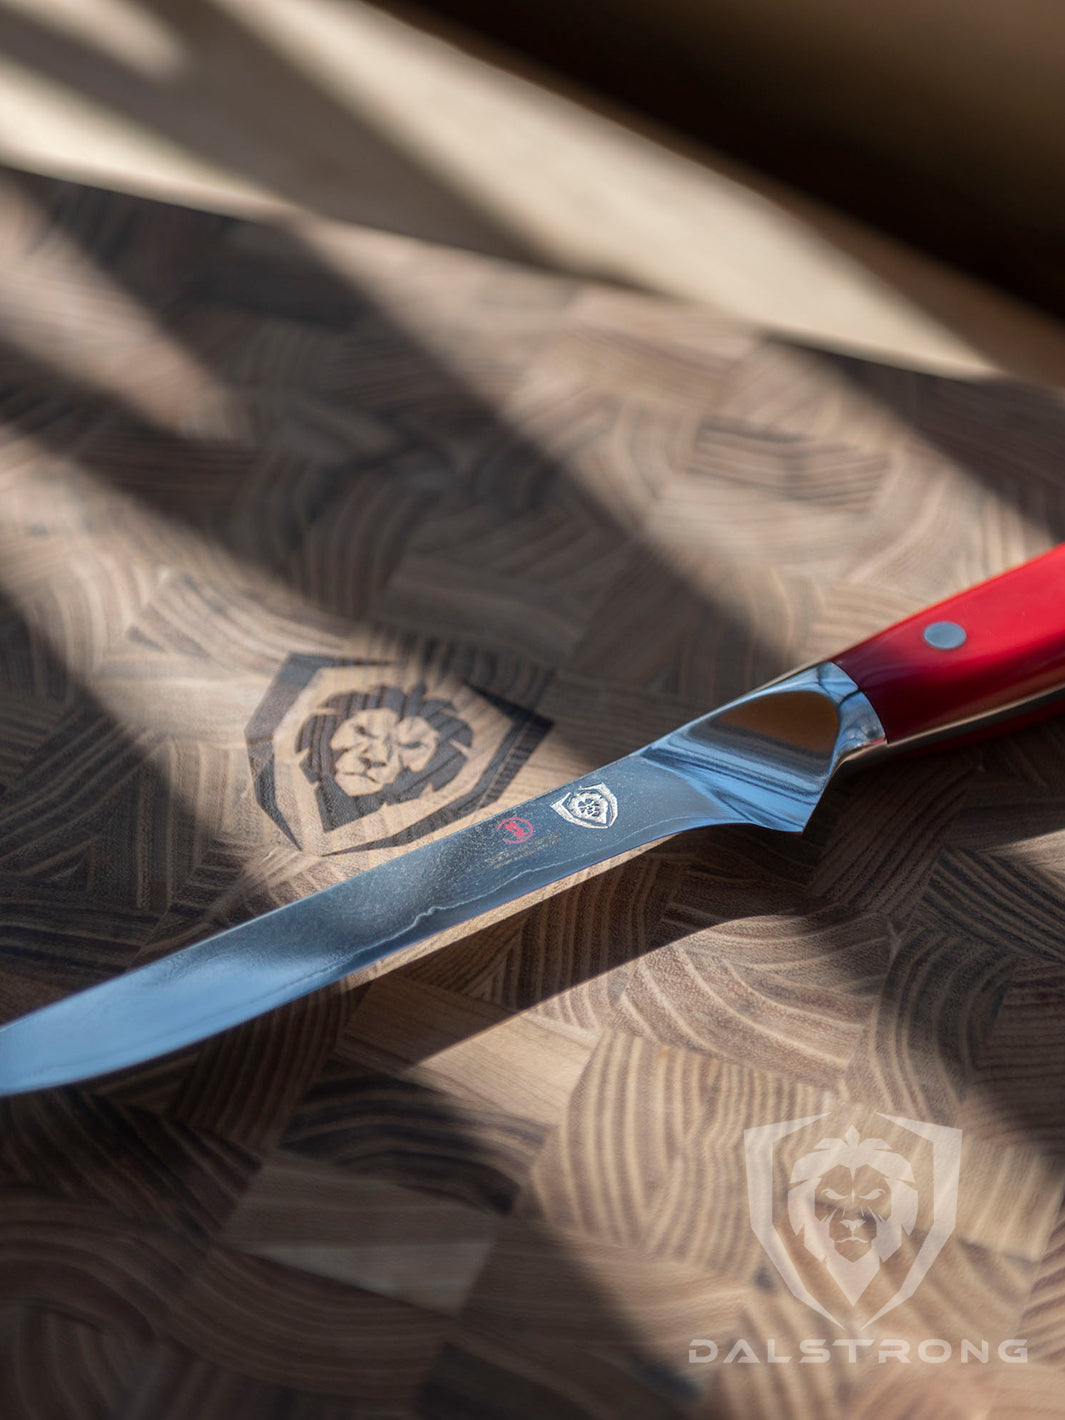 Dalstrong shogun series 6 inch boning knife with red handle in top of a dalstrong wooden board.